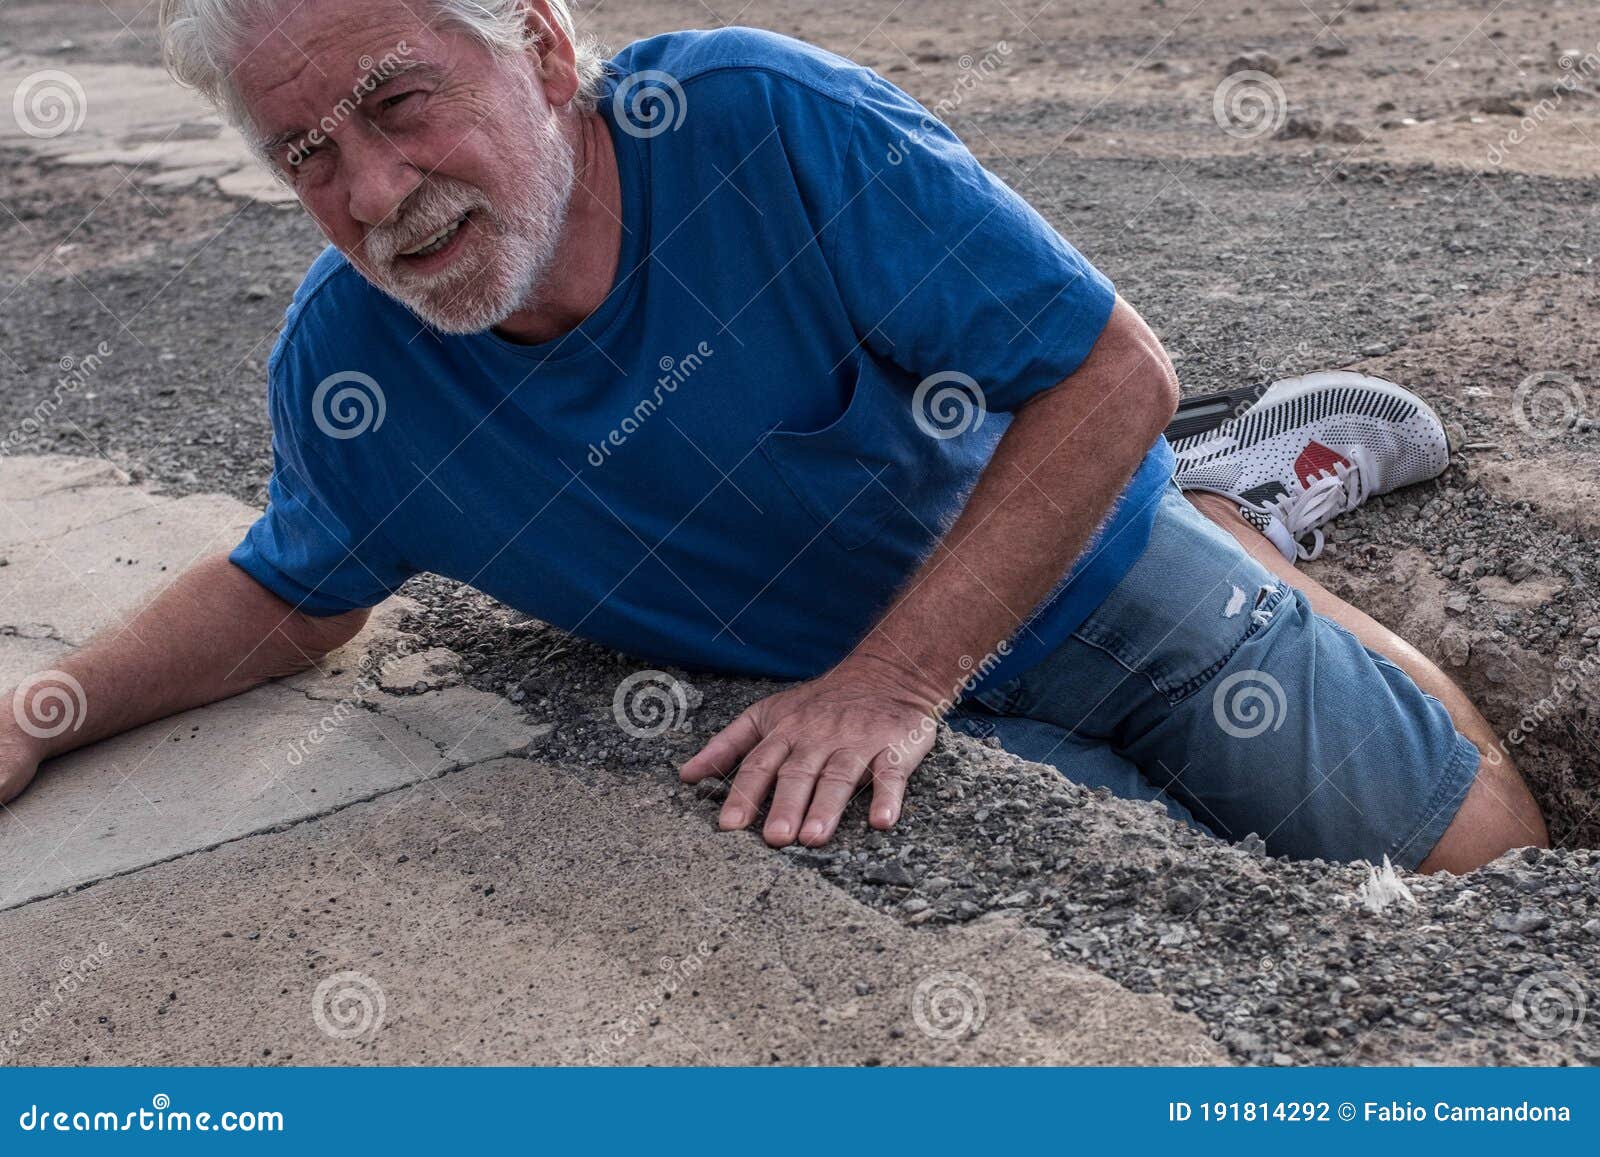 mature man or senior walking in a building zone and falling in a big hole with her leg inside it - needing help on the ground with